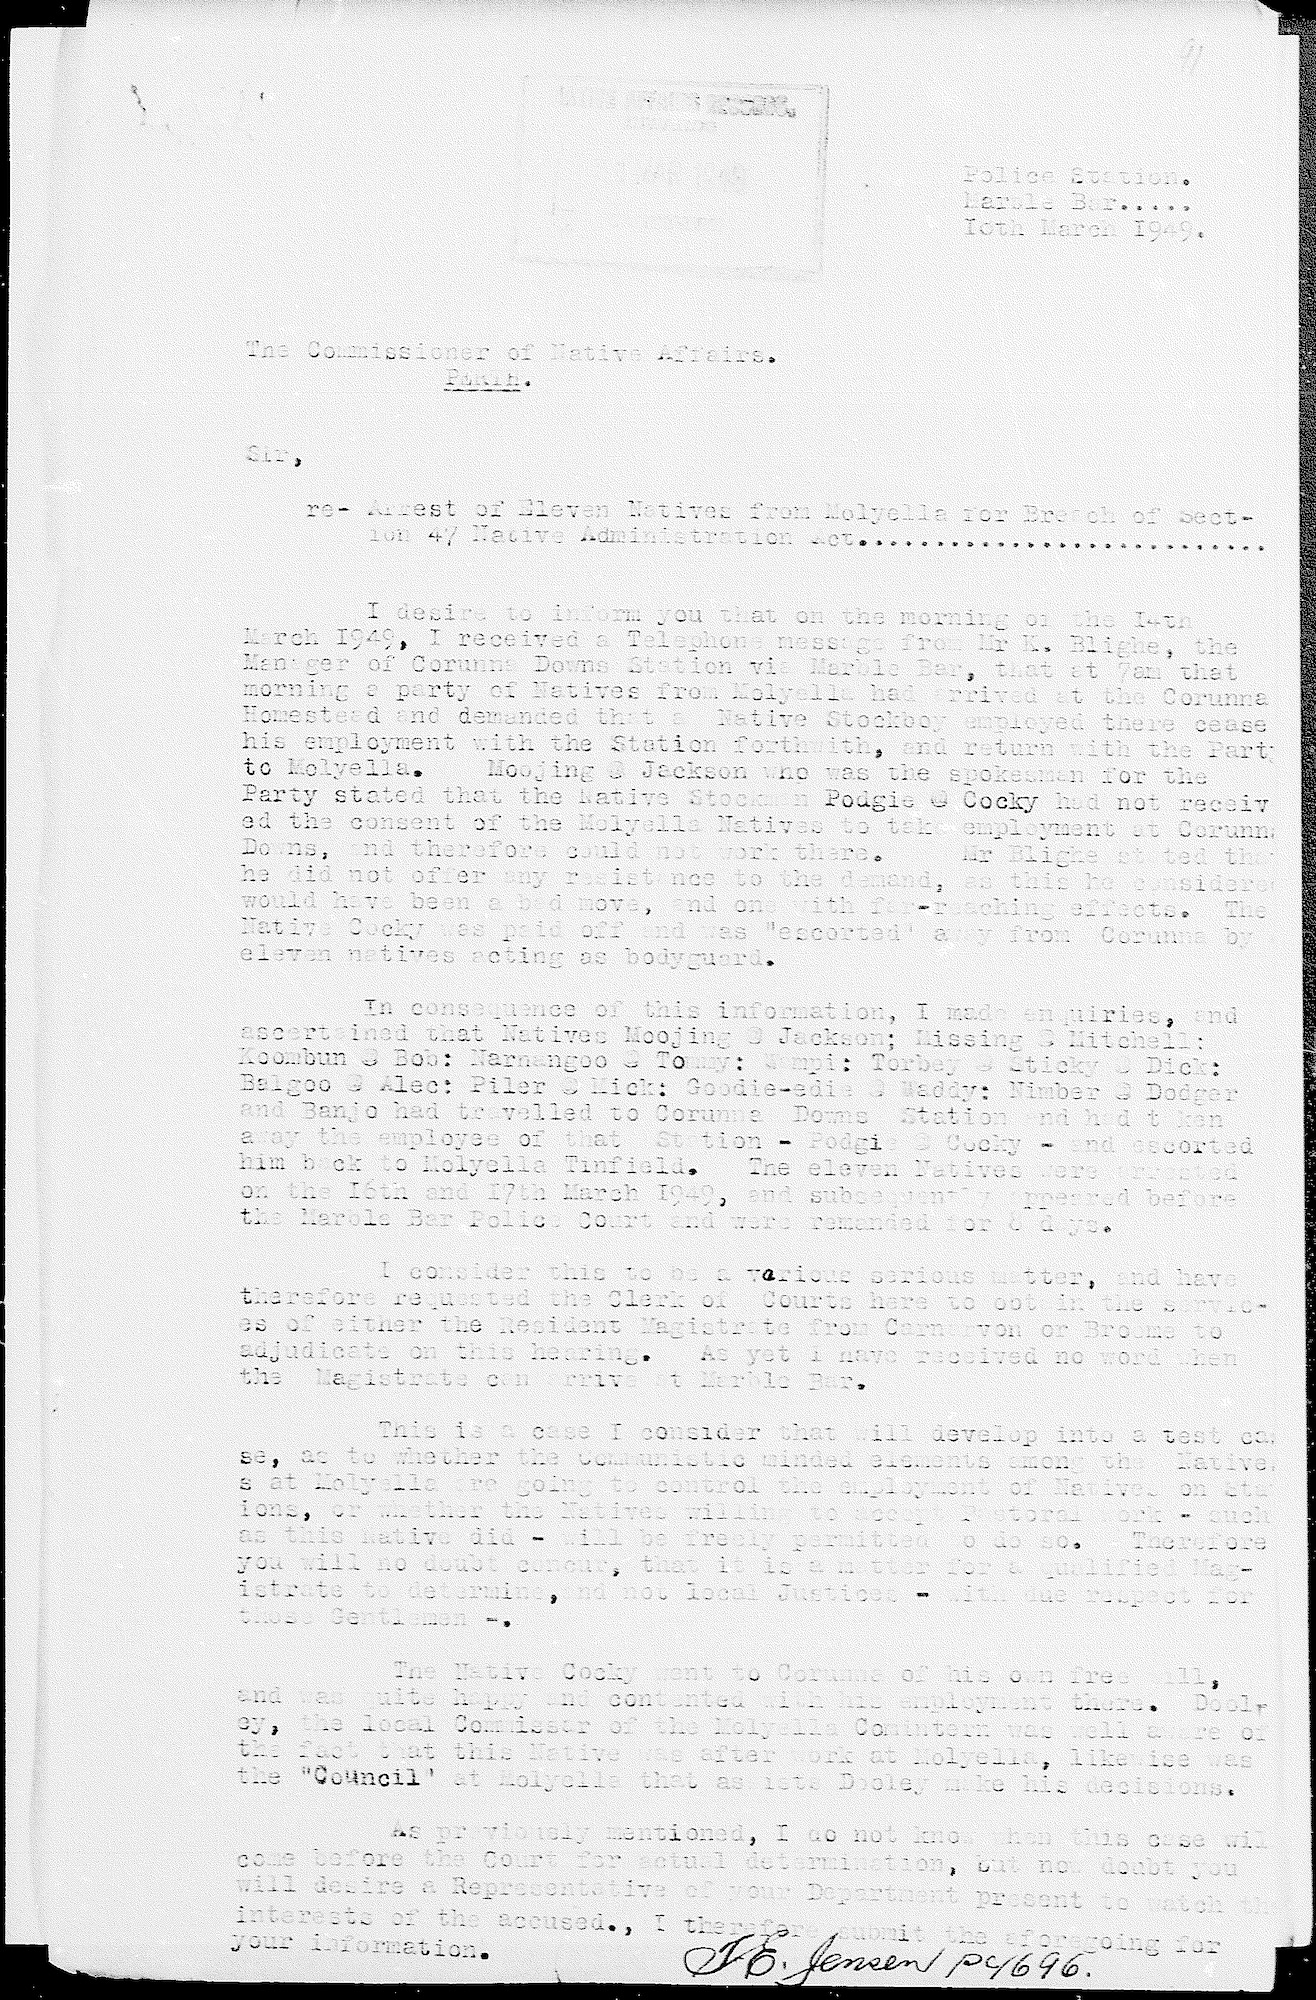 Constable Tom Jensen to Commissioner Stan Middleton, 10 March 1949